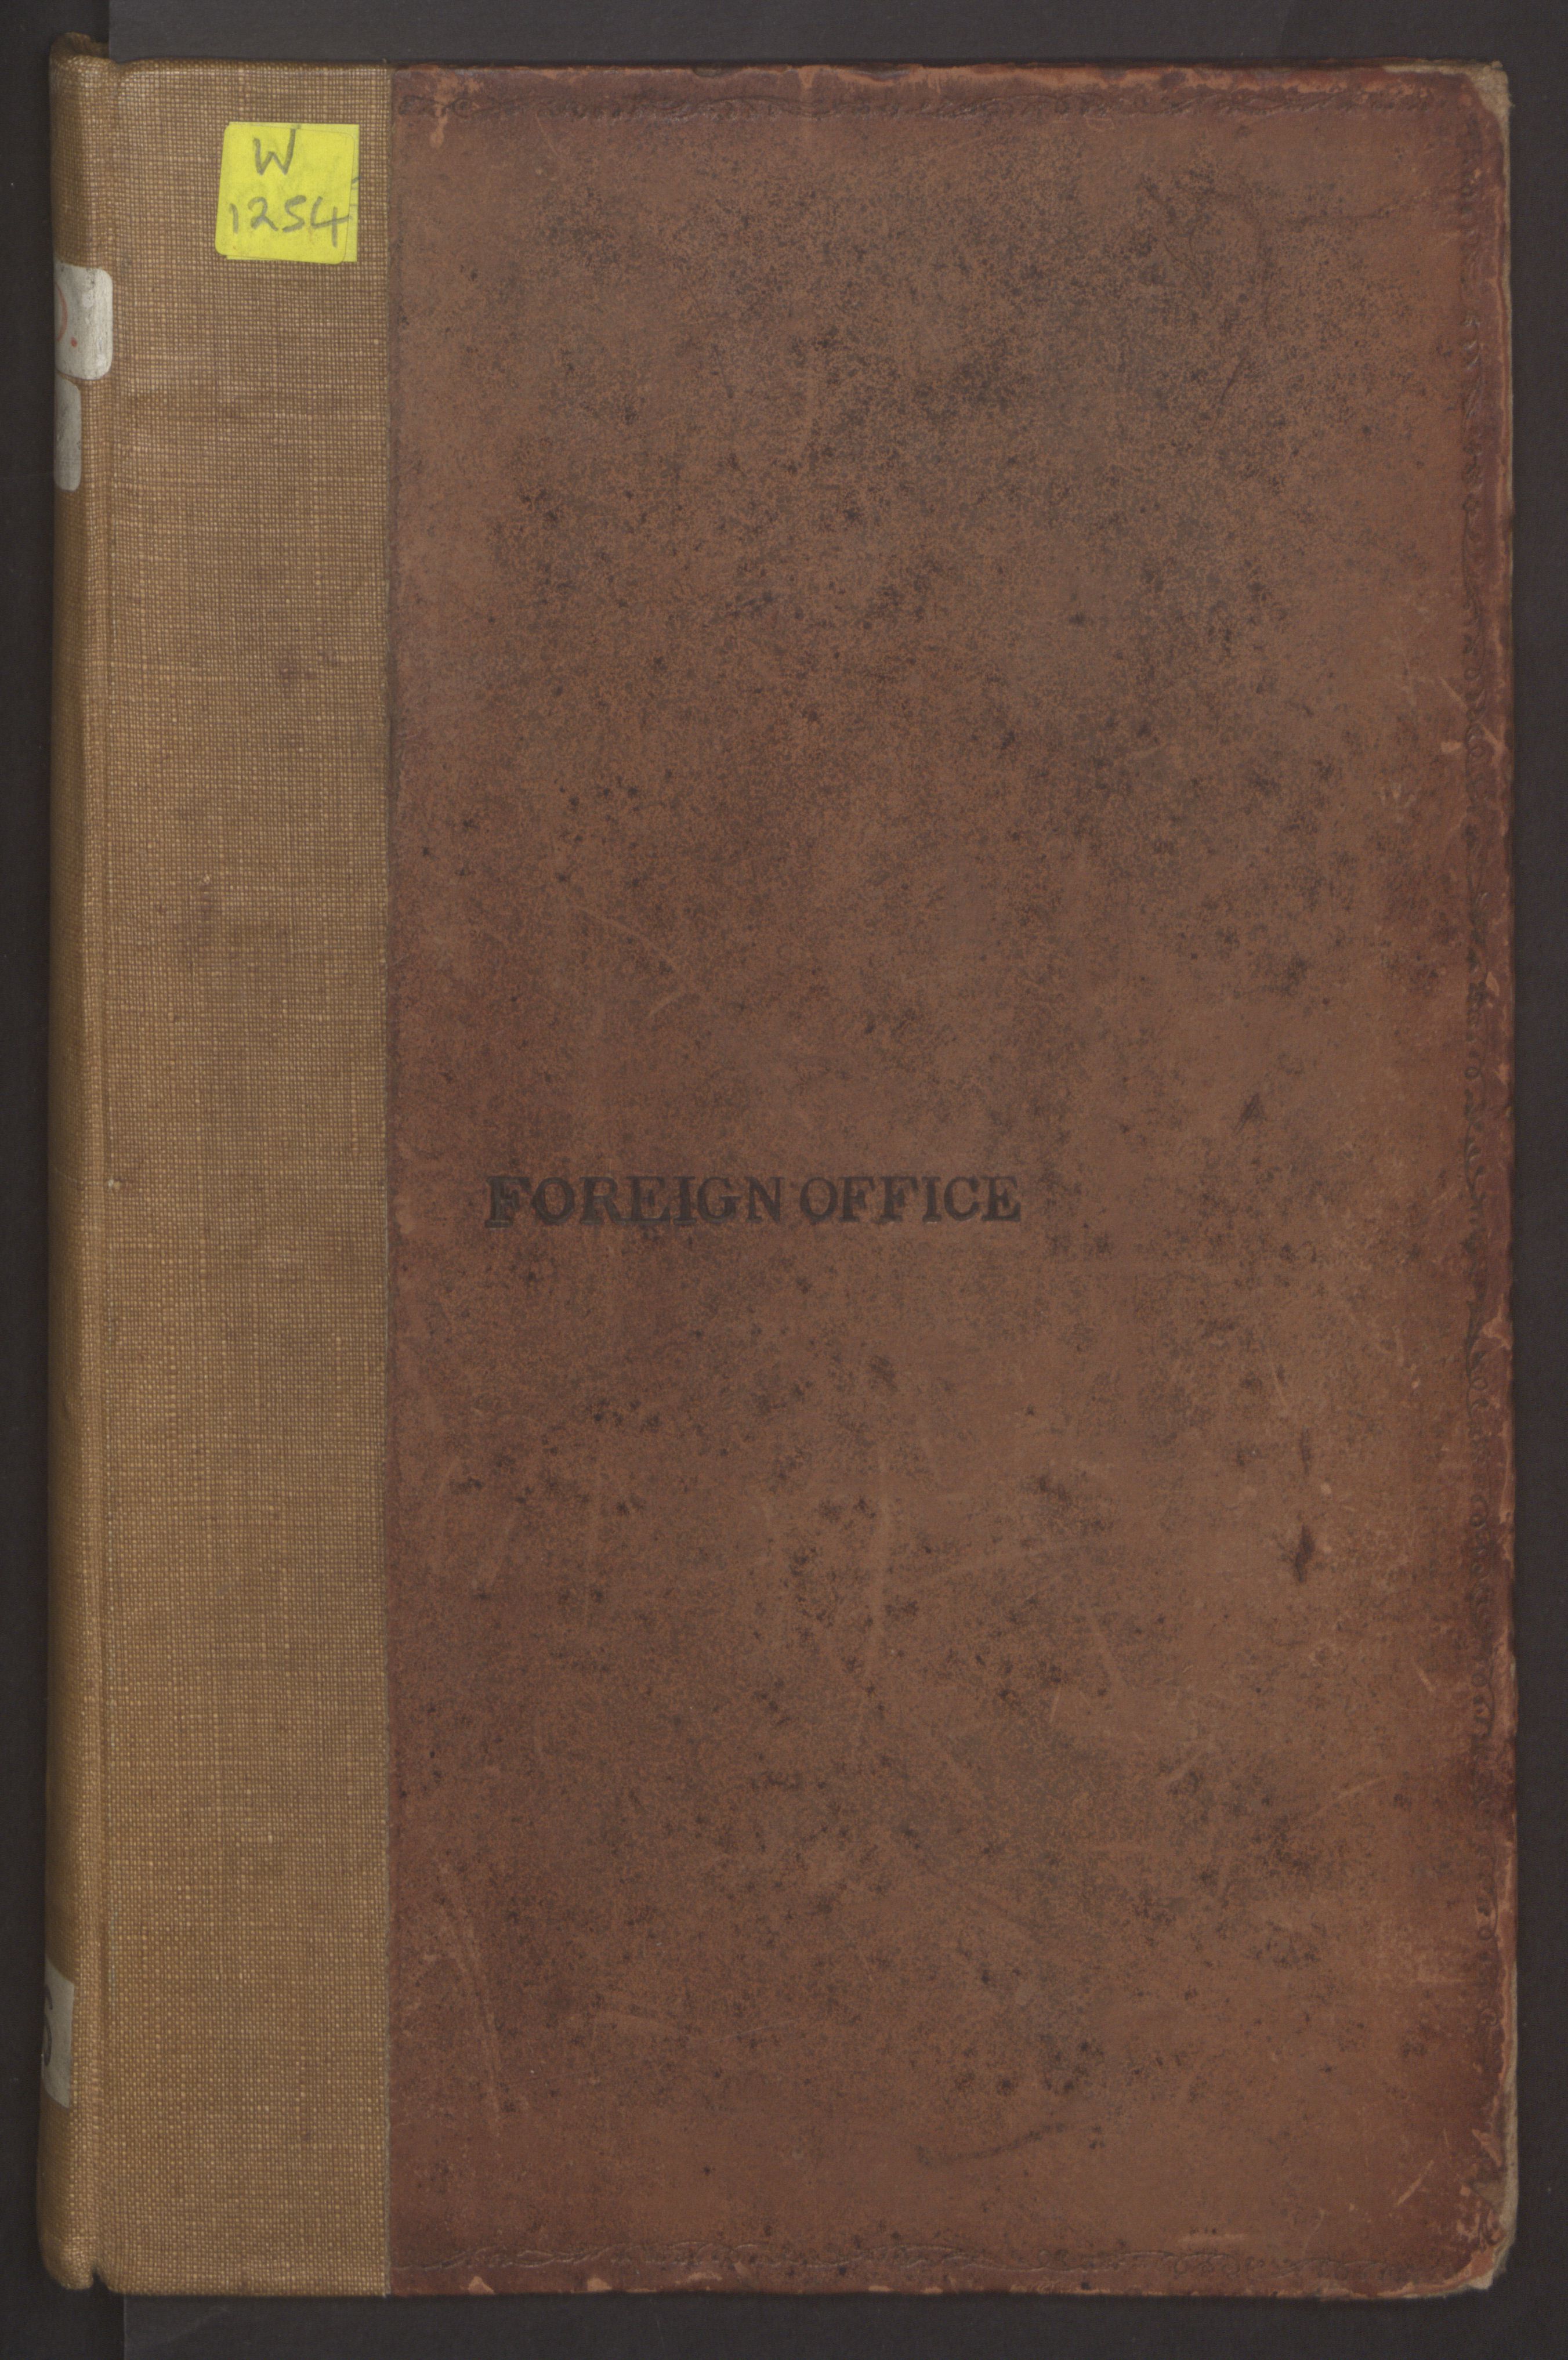 Foreign Office*, UKA/-/FO 38/16: Sir C. Gordon. Reports from Malmö, Jonkoping, and Helsingborg, 1814, s. 1